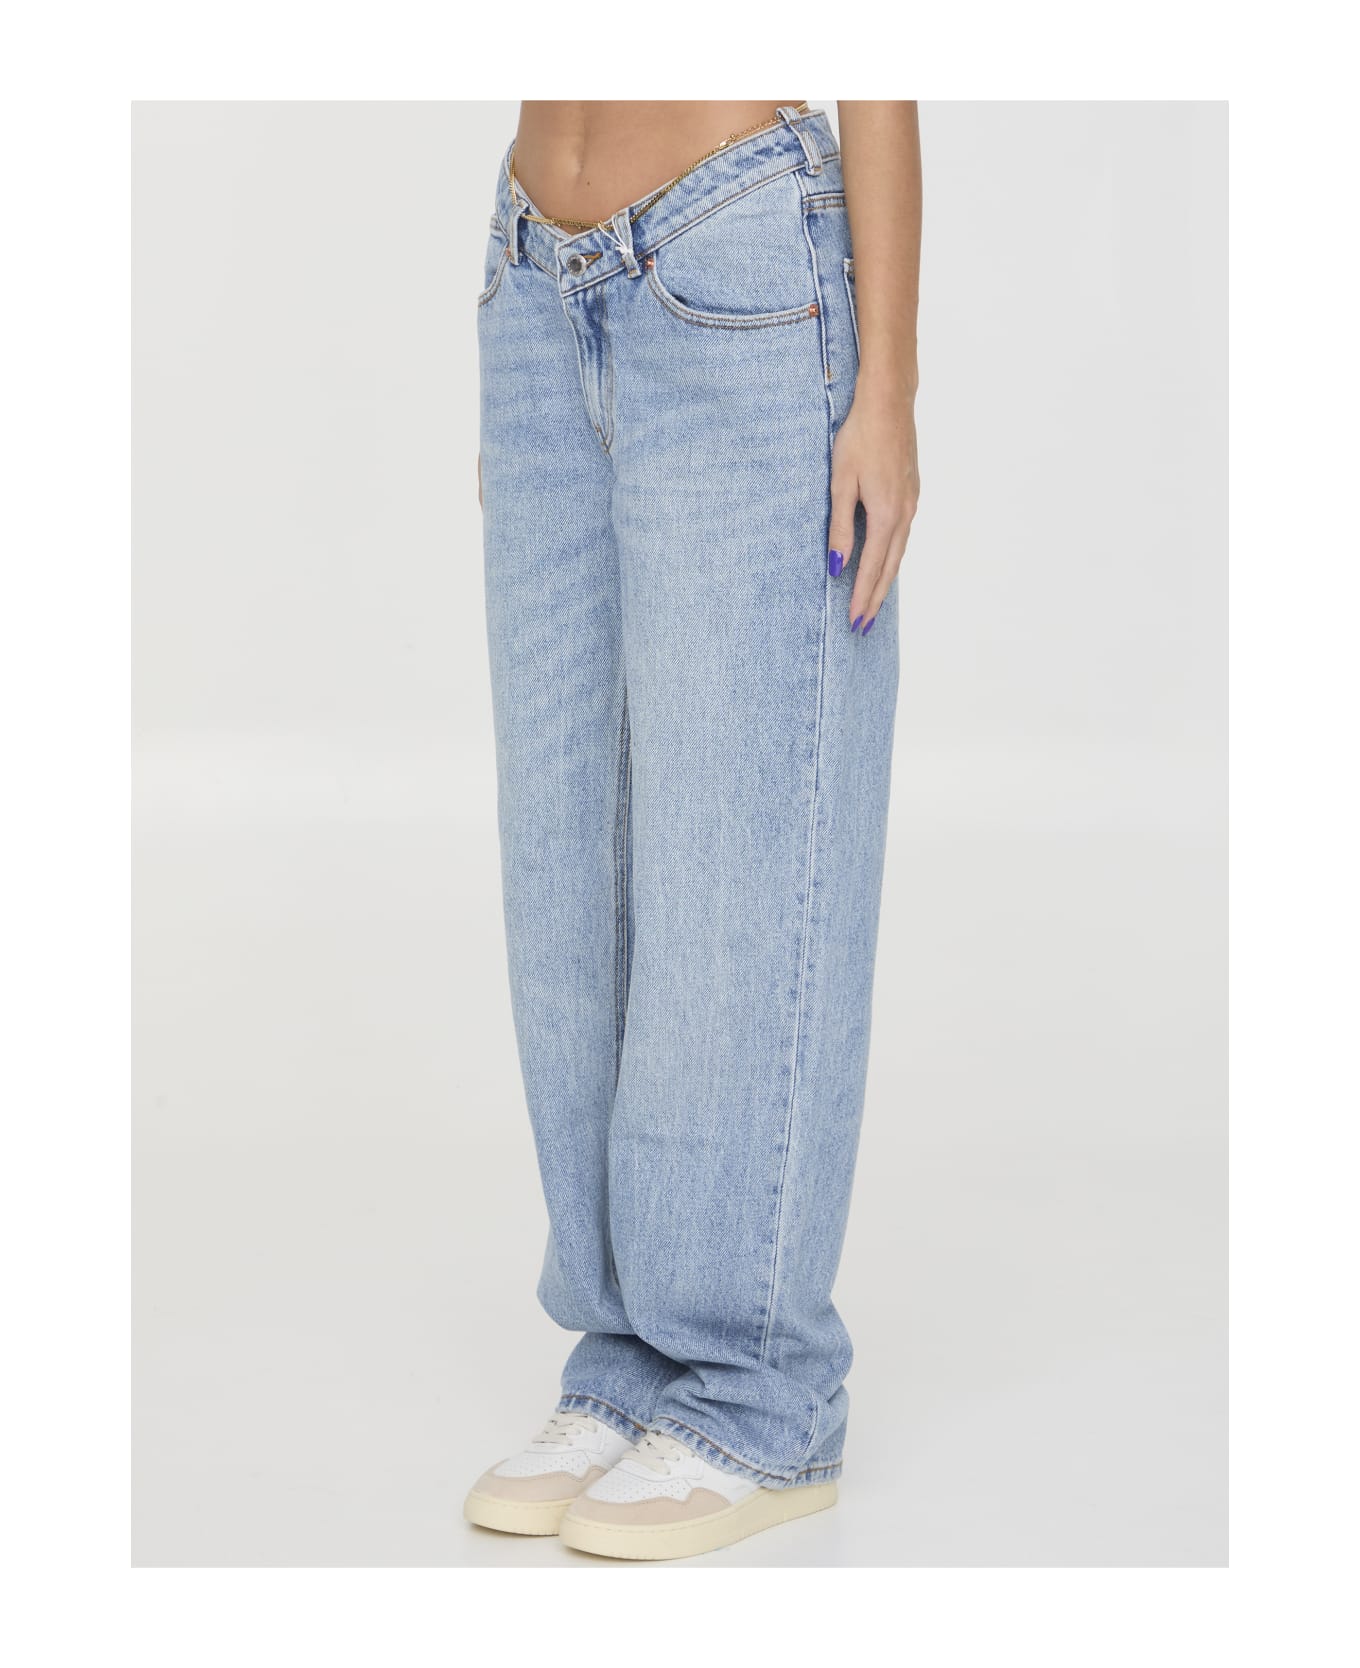 Alexander Wang Denim Jeans With Nameplate - BLUE デニム